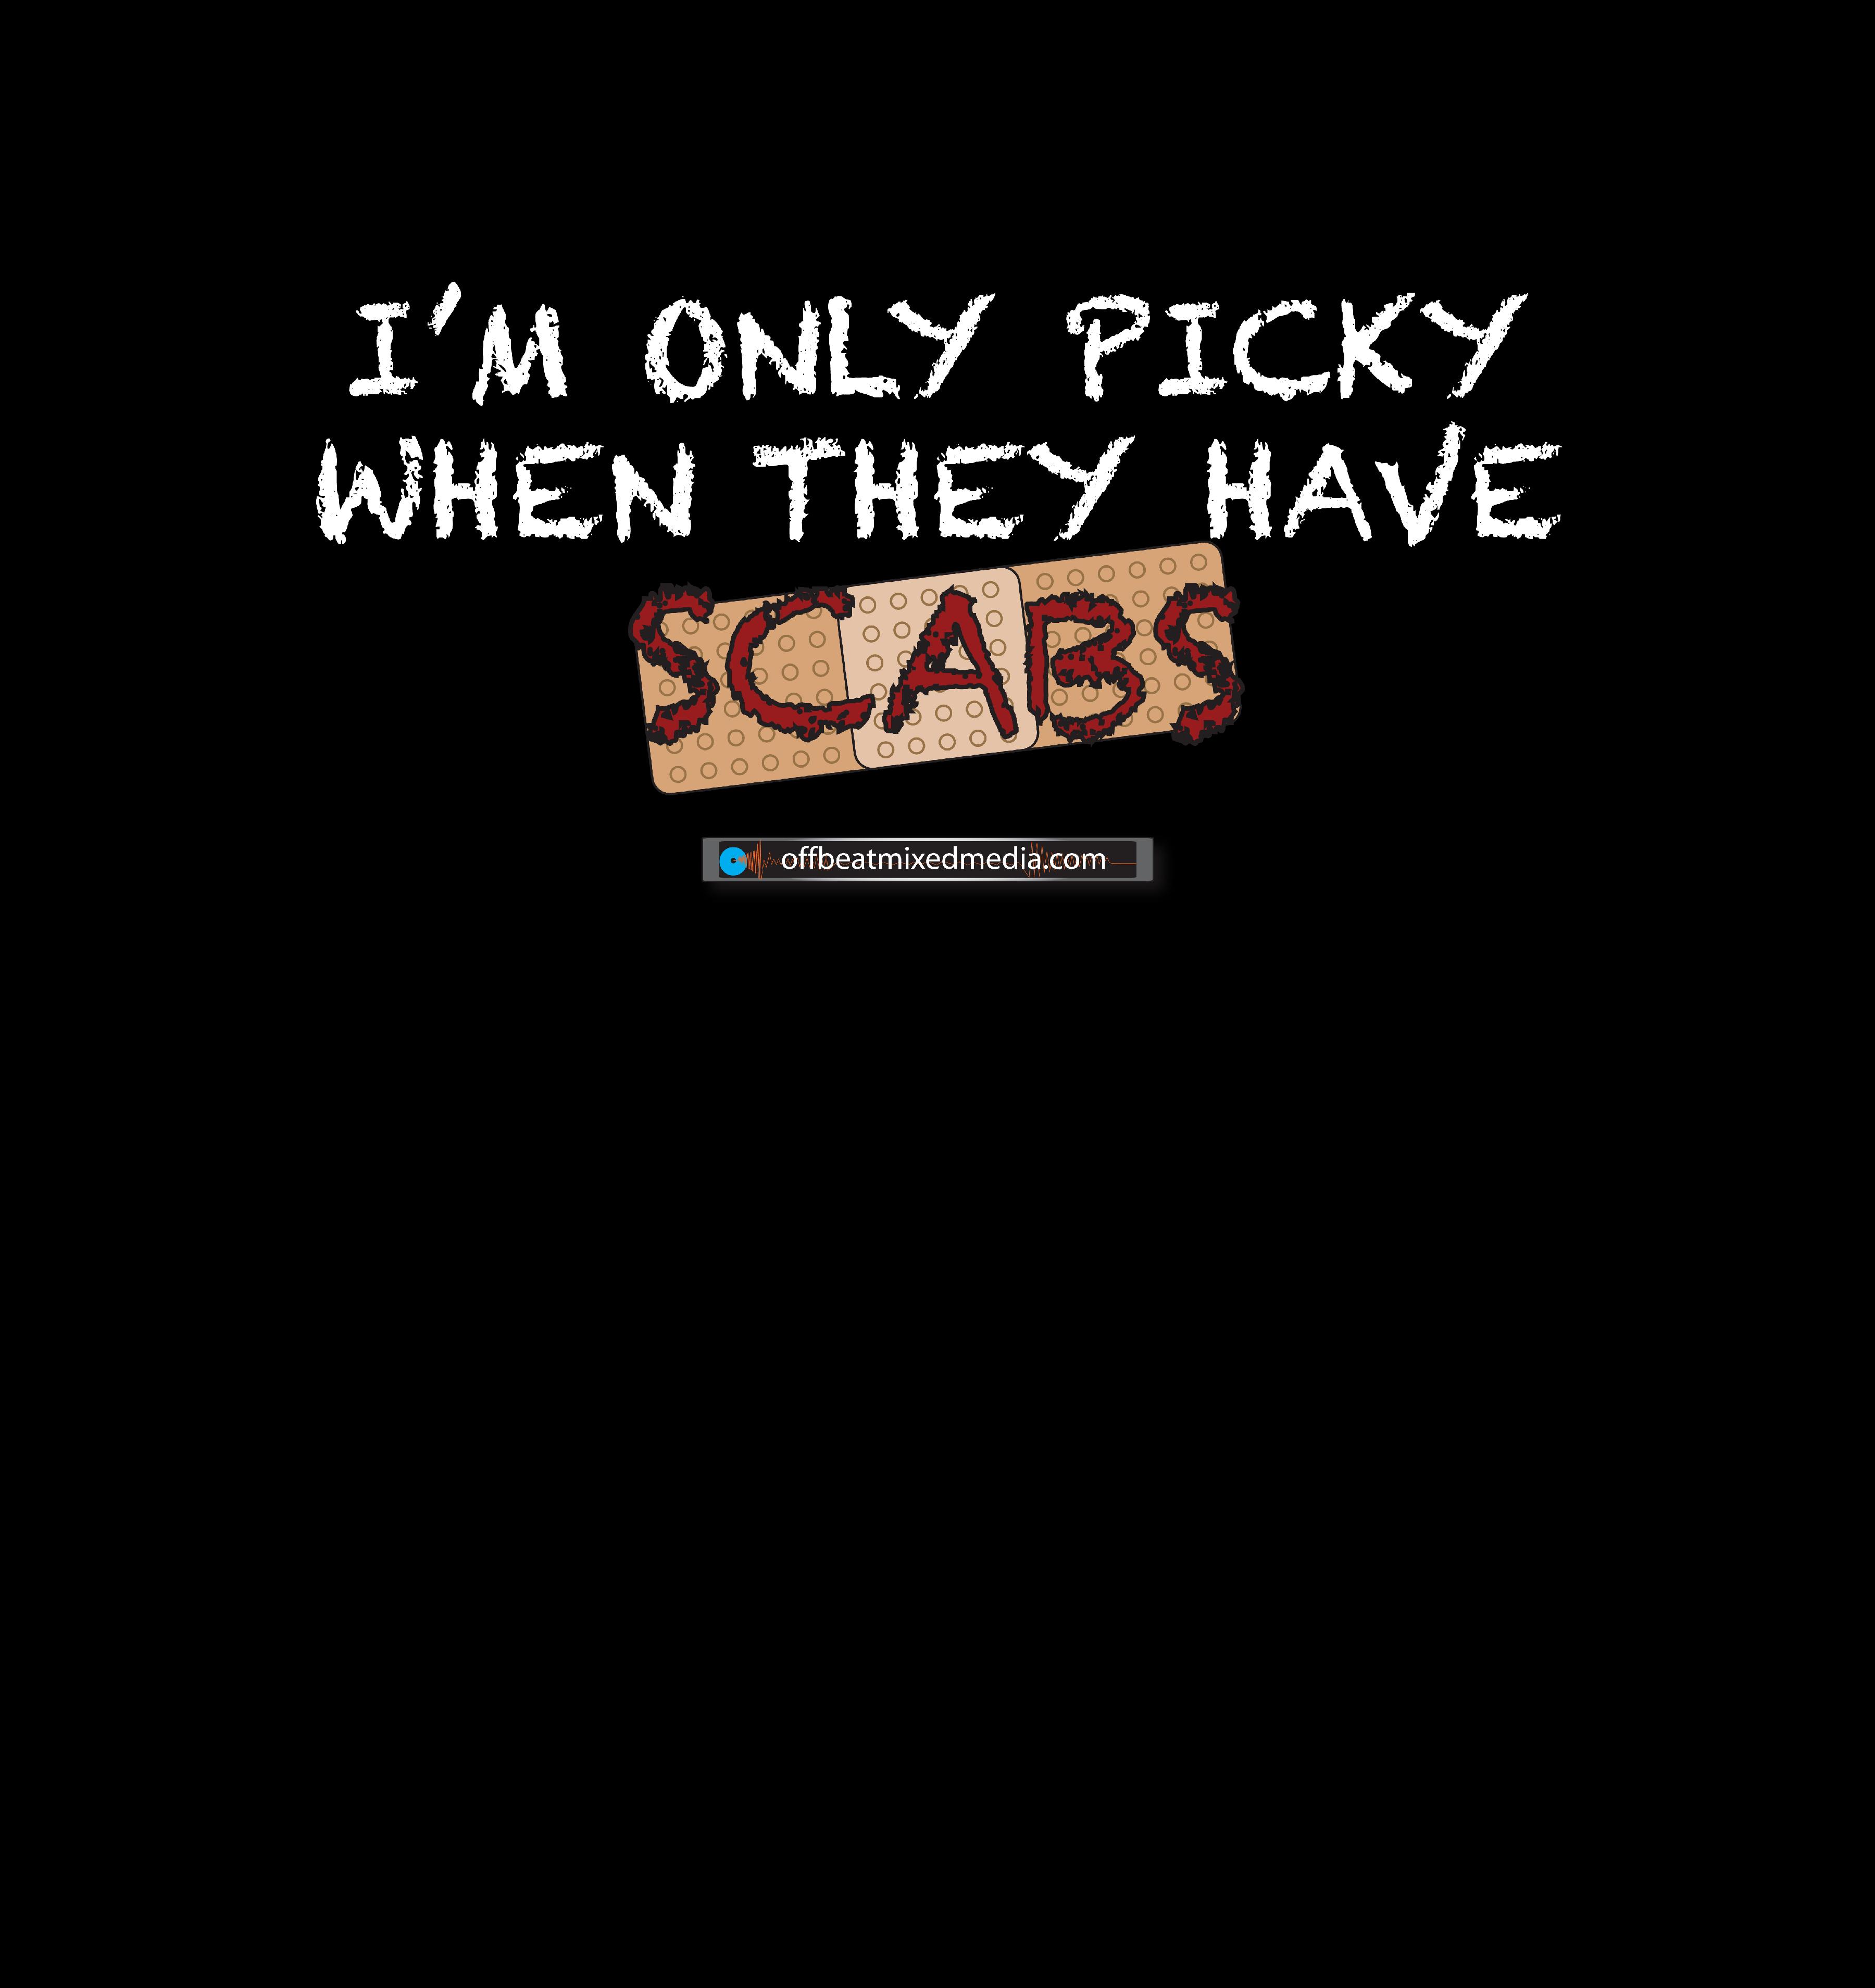 pickyscabs